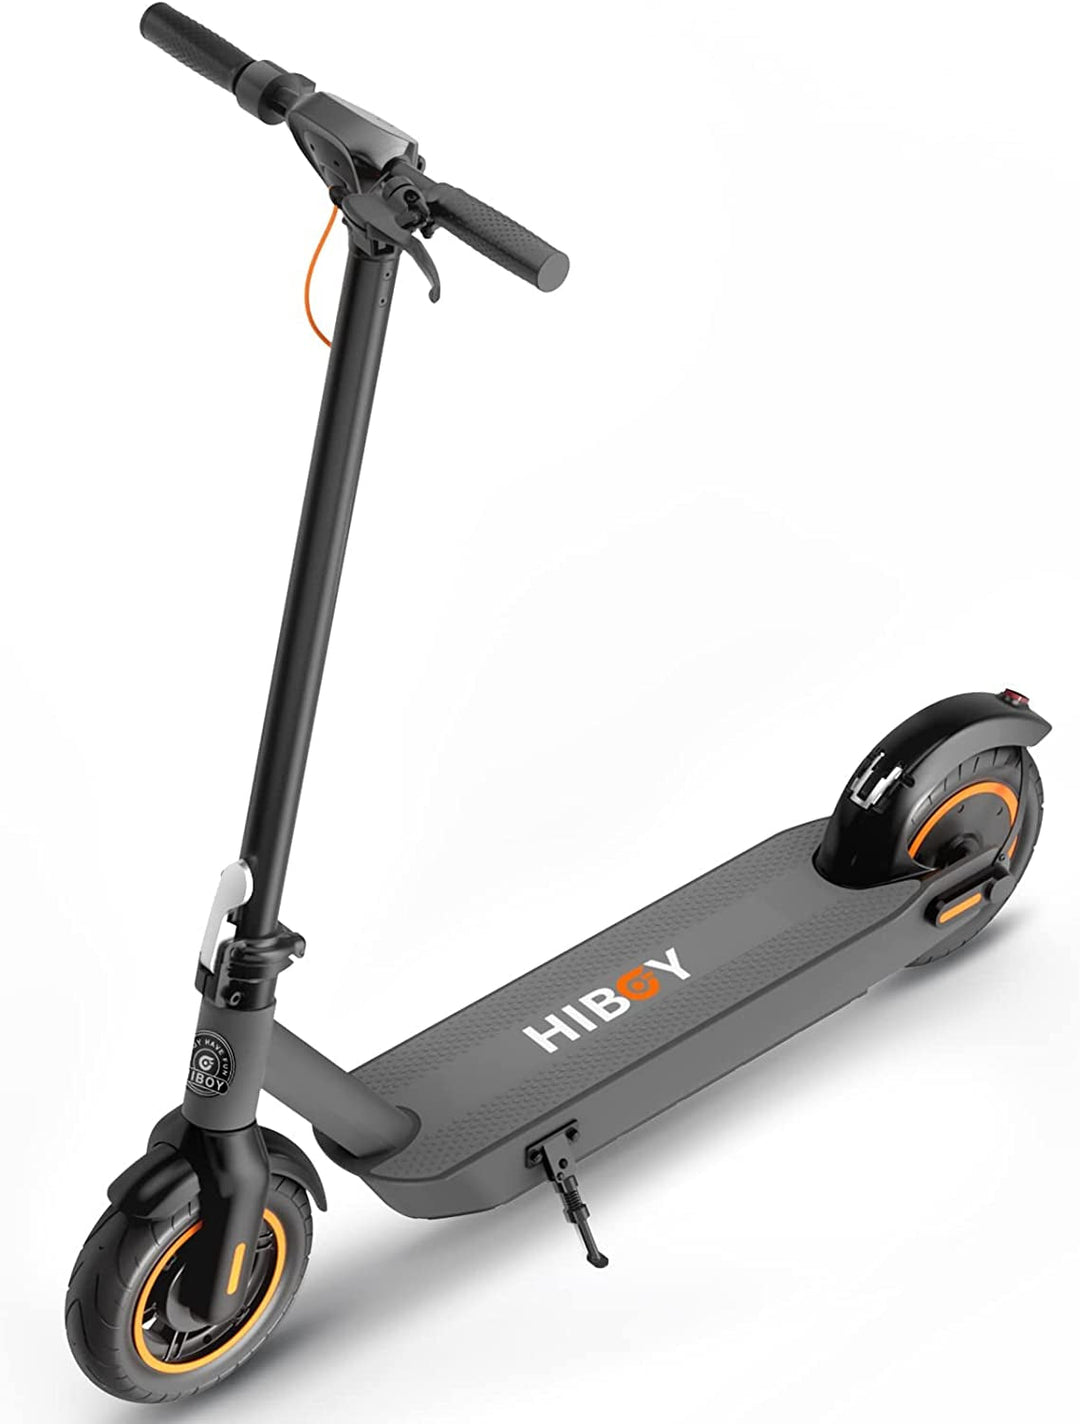 Hiboy S2 Pro/S2 MAX Electric Scooter, 500W Motor